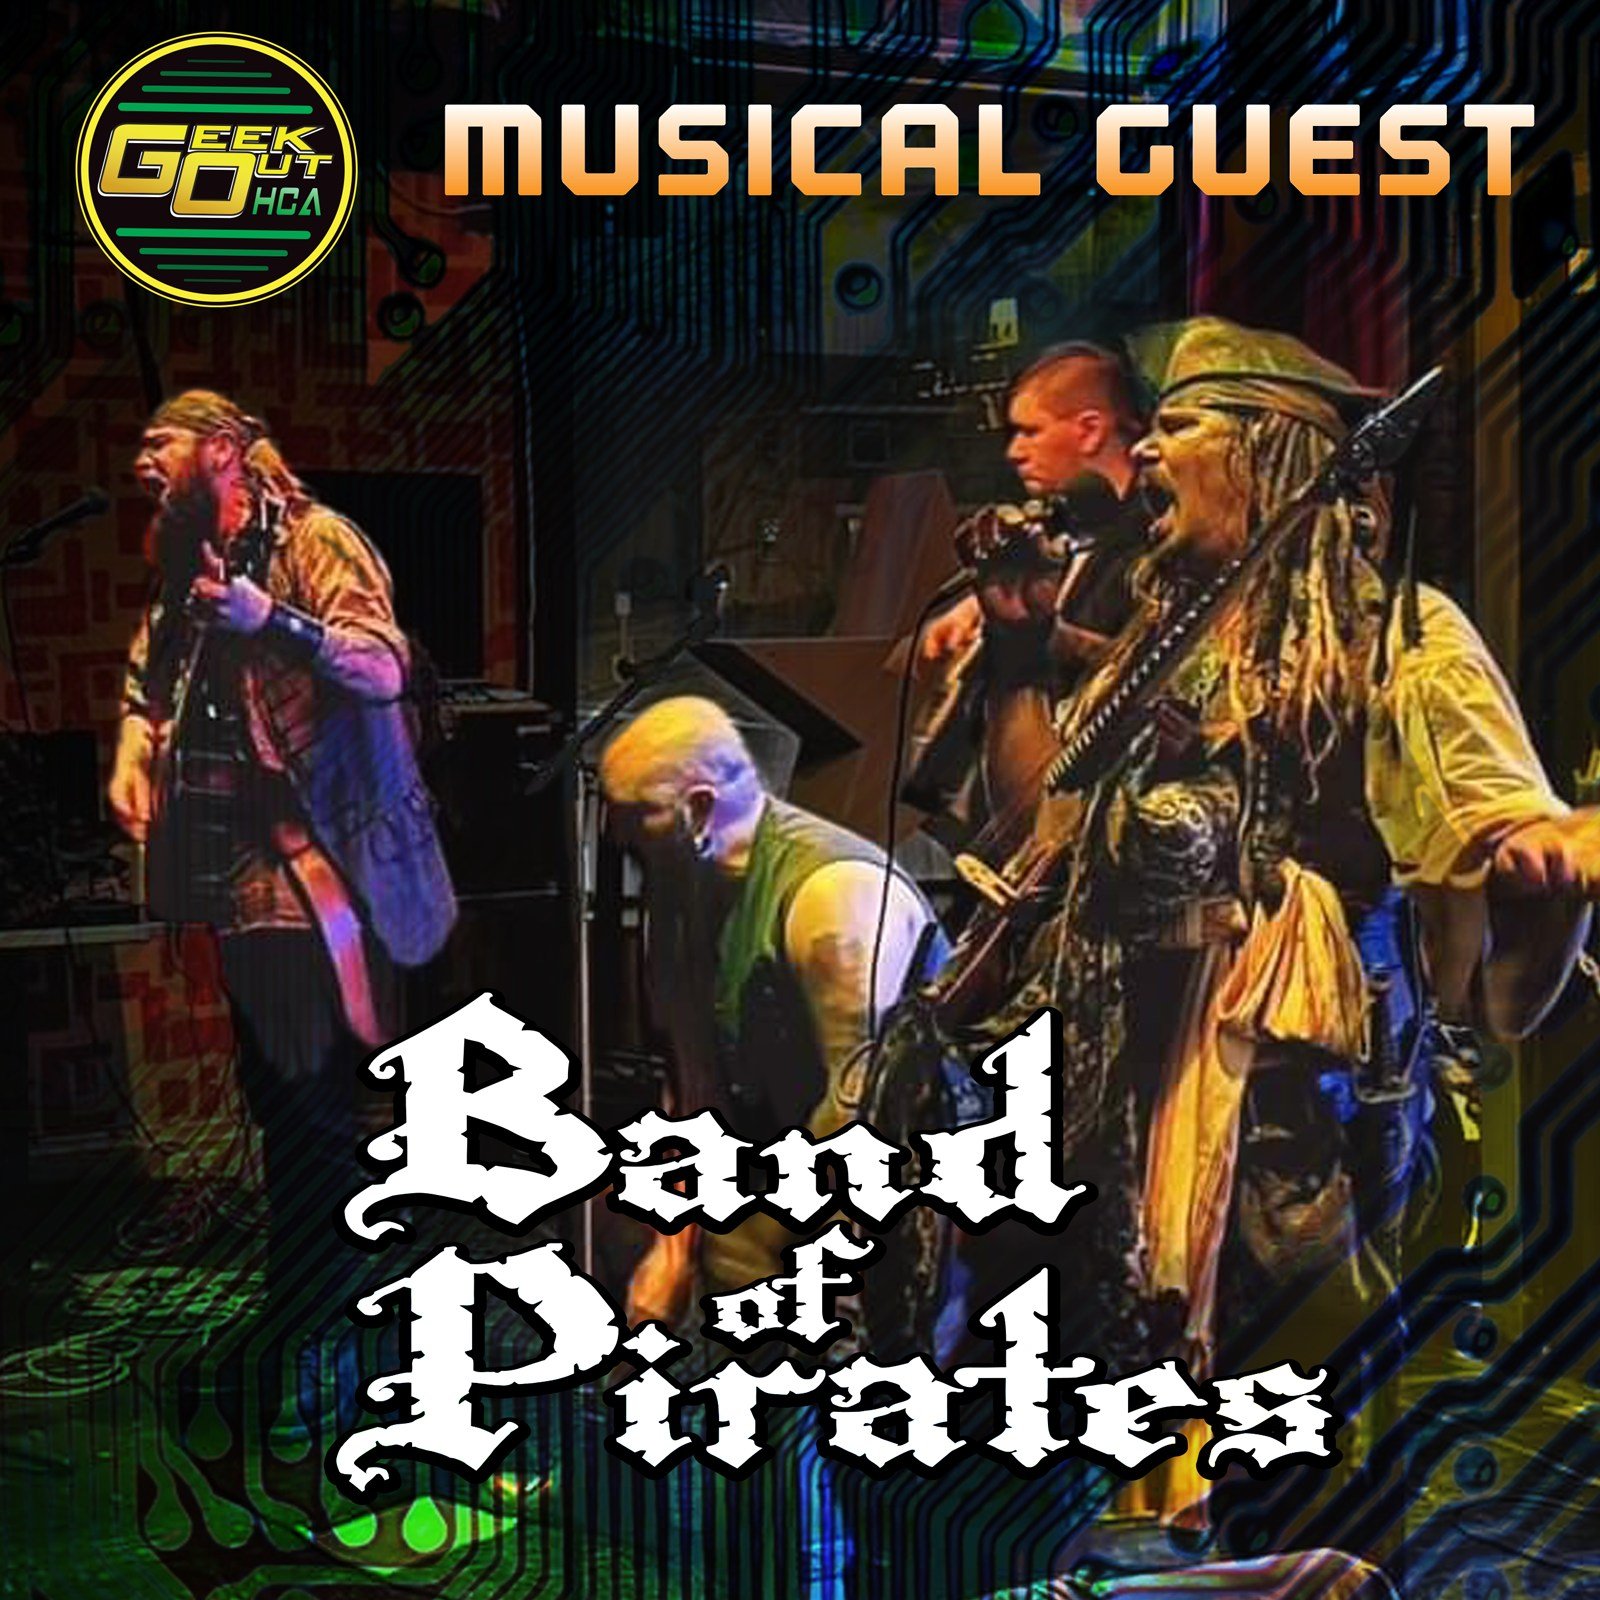   MUSICAL GUEST ANNOUNCEMENT  Ahoy ye mateys!! Band of Pirates will be commandeering main stage this year on Saturday night, so be sure to grab yer best mates and catch these scallywags as they entertain us with fun filled shanties and hearty laughs!